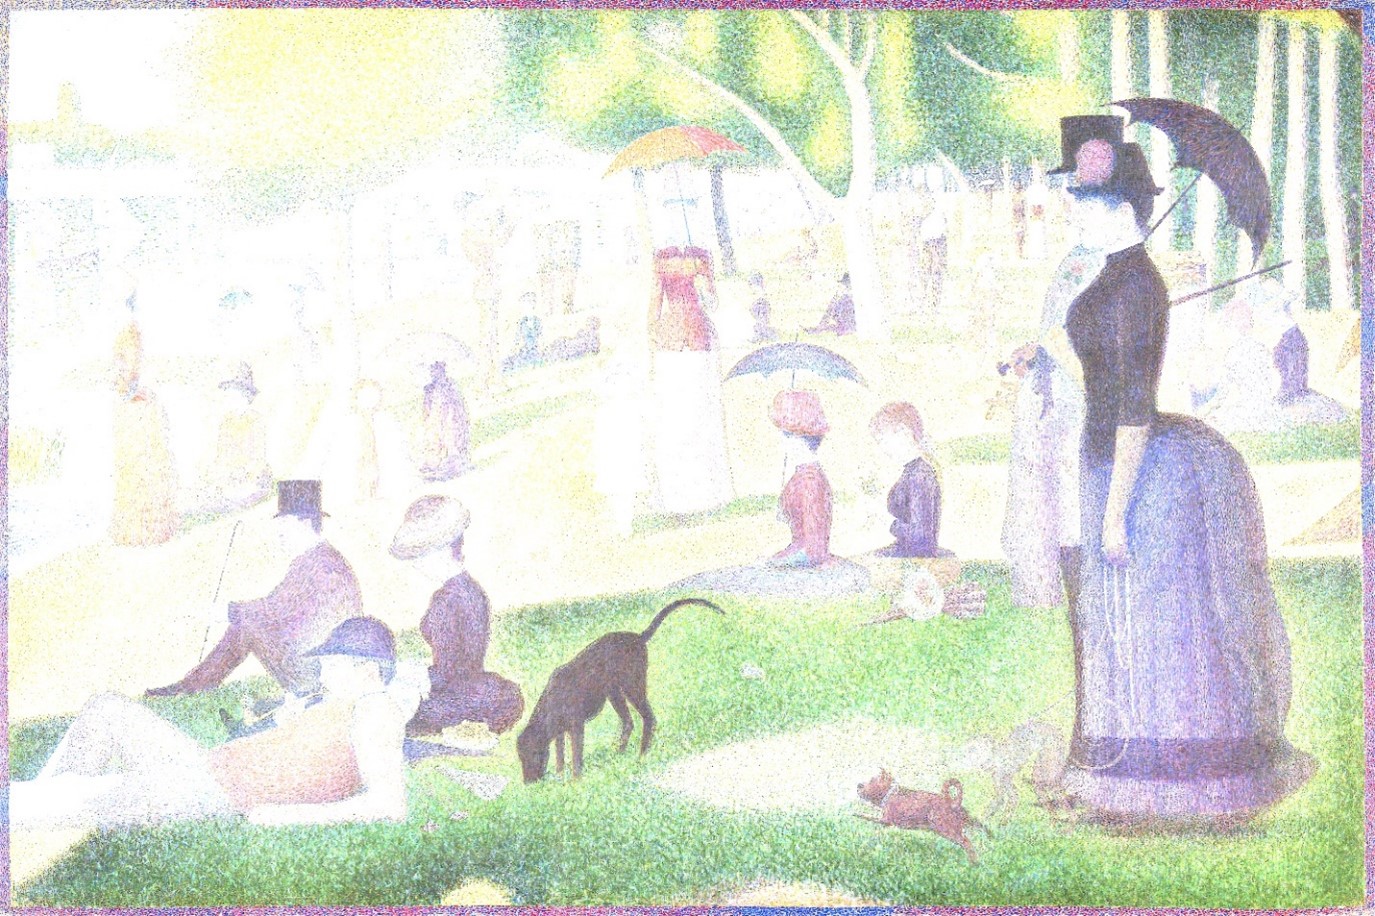 A painting depicts a crowd of individuals gathered in a park along a river. Compared with figure 3, all lighter pixels have been changed to white, representing top-coding, which preserves privacy by recoding extreme values.